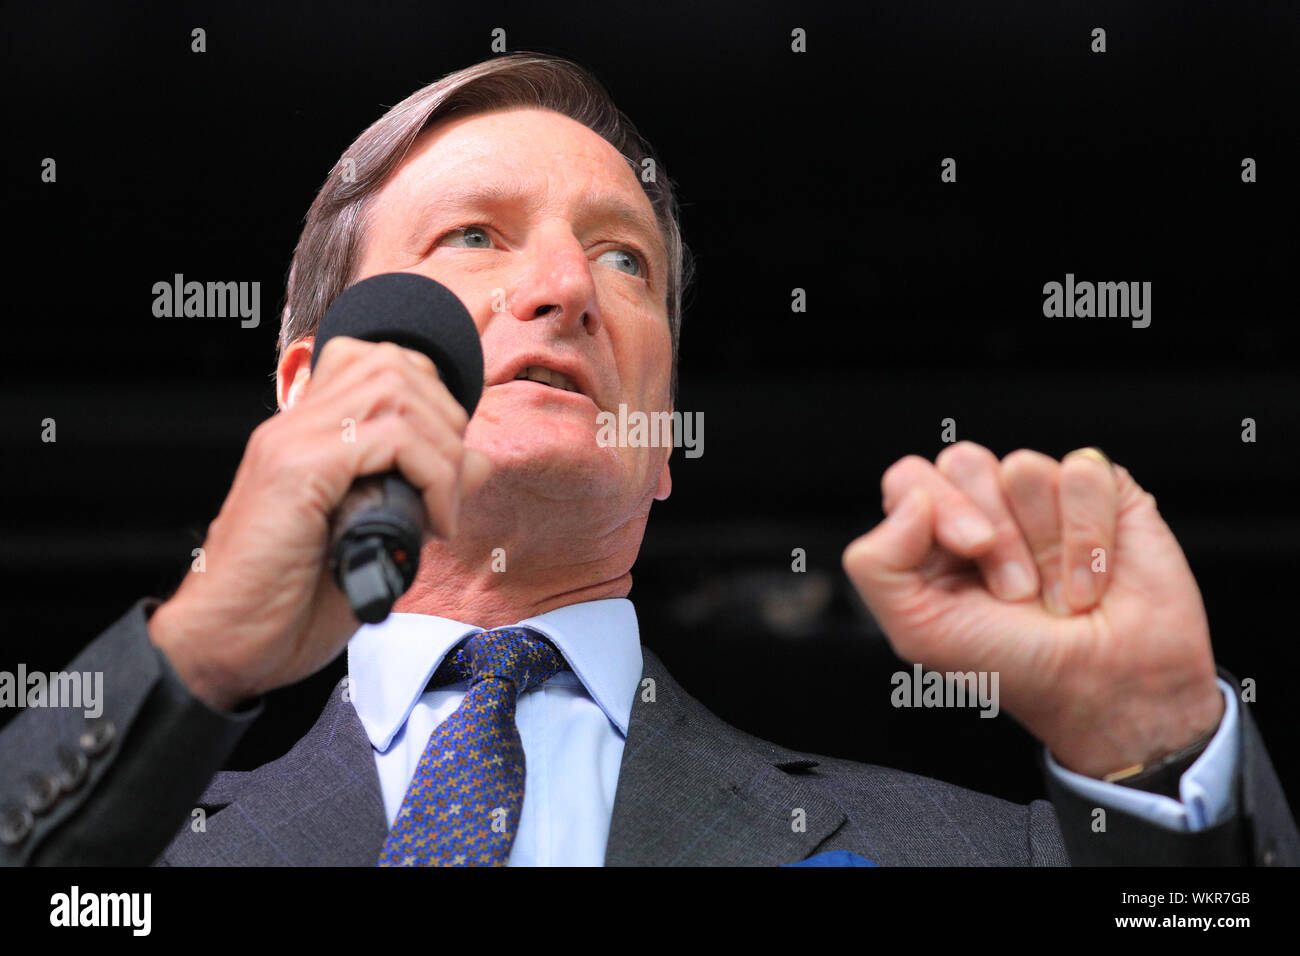 Westminster, London, 04th Sep 2019.Dominic Grieve, so called 'Tory Rebel' and one of the former Conservative MPs who lost the Conservative Whip on 03 Sept 2019 as they voted against the government. Politicians speak passionately on stage. speaks at the People's Vote Rally in Parliament Square, Westminster, with the aim to get a final vote on Brexit. Many of the speakers shortly afterwards rush into Parliament to cast their votes in another round of crucial Brexit related decisions to be taken. Credit: Imageplotter/Alamy Live News Stock Photo